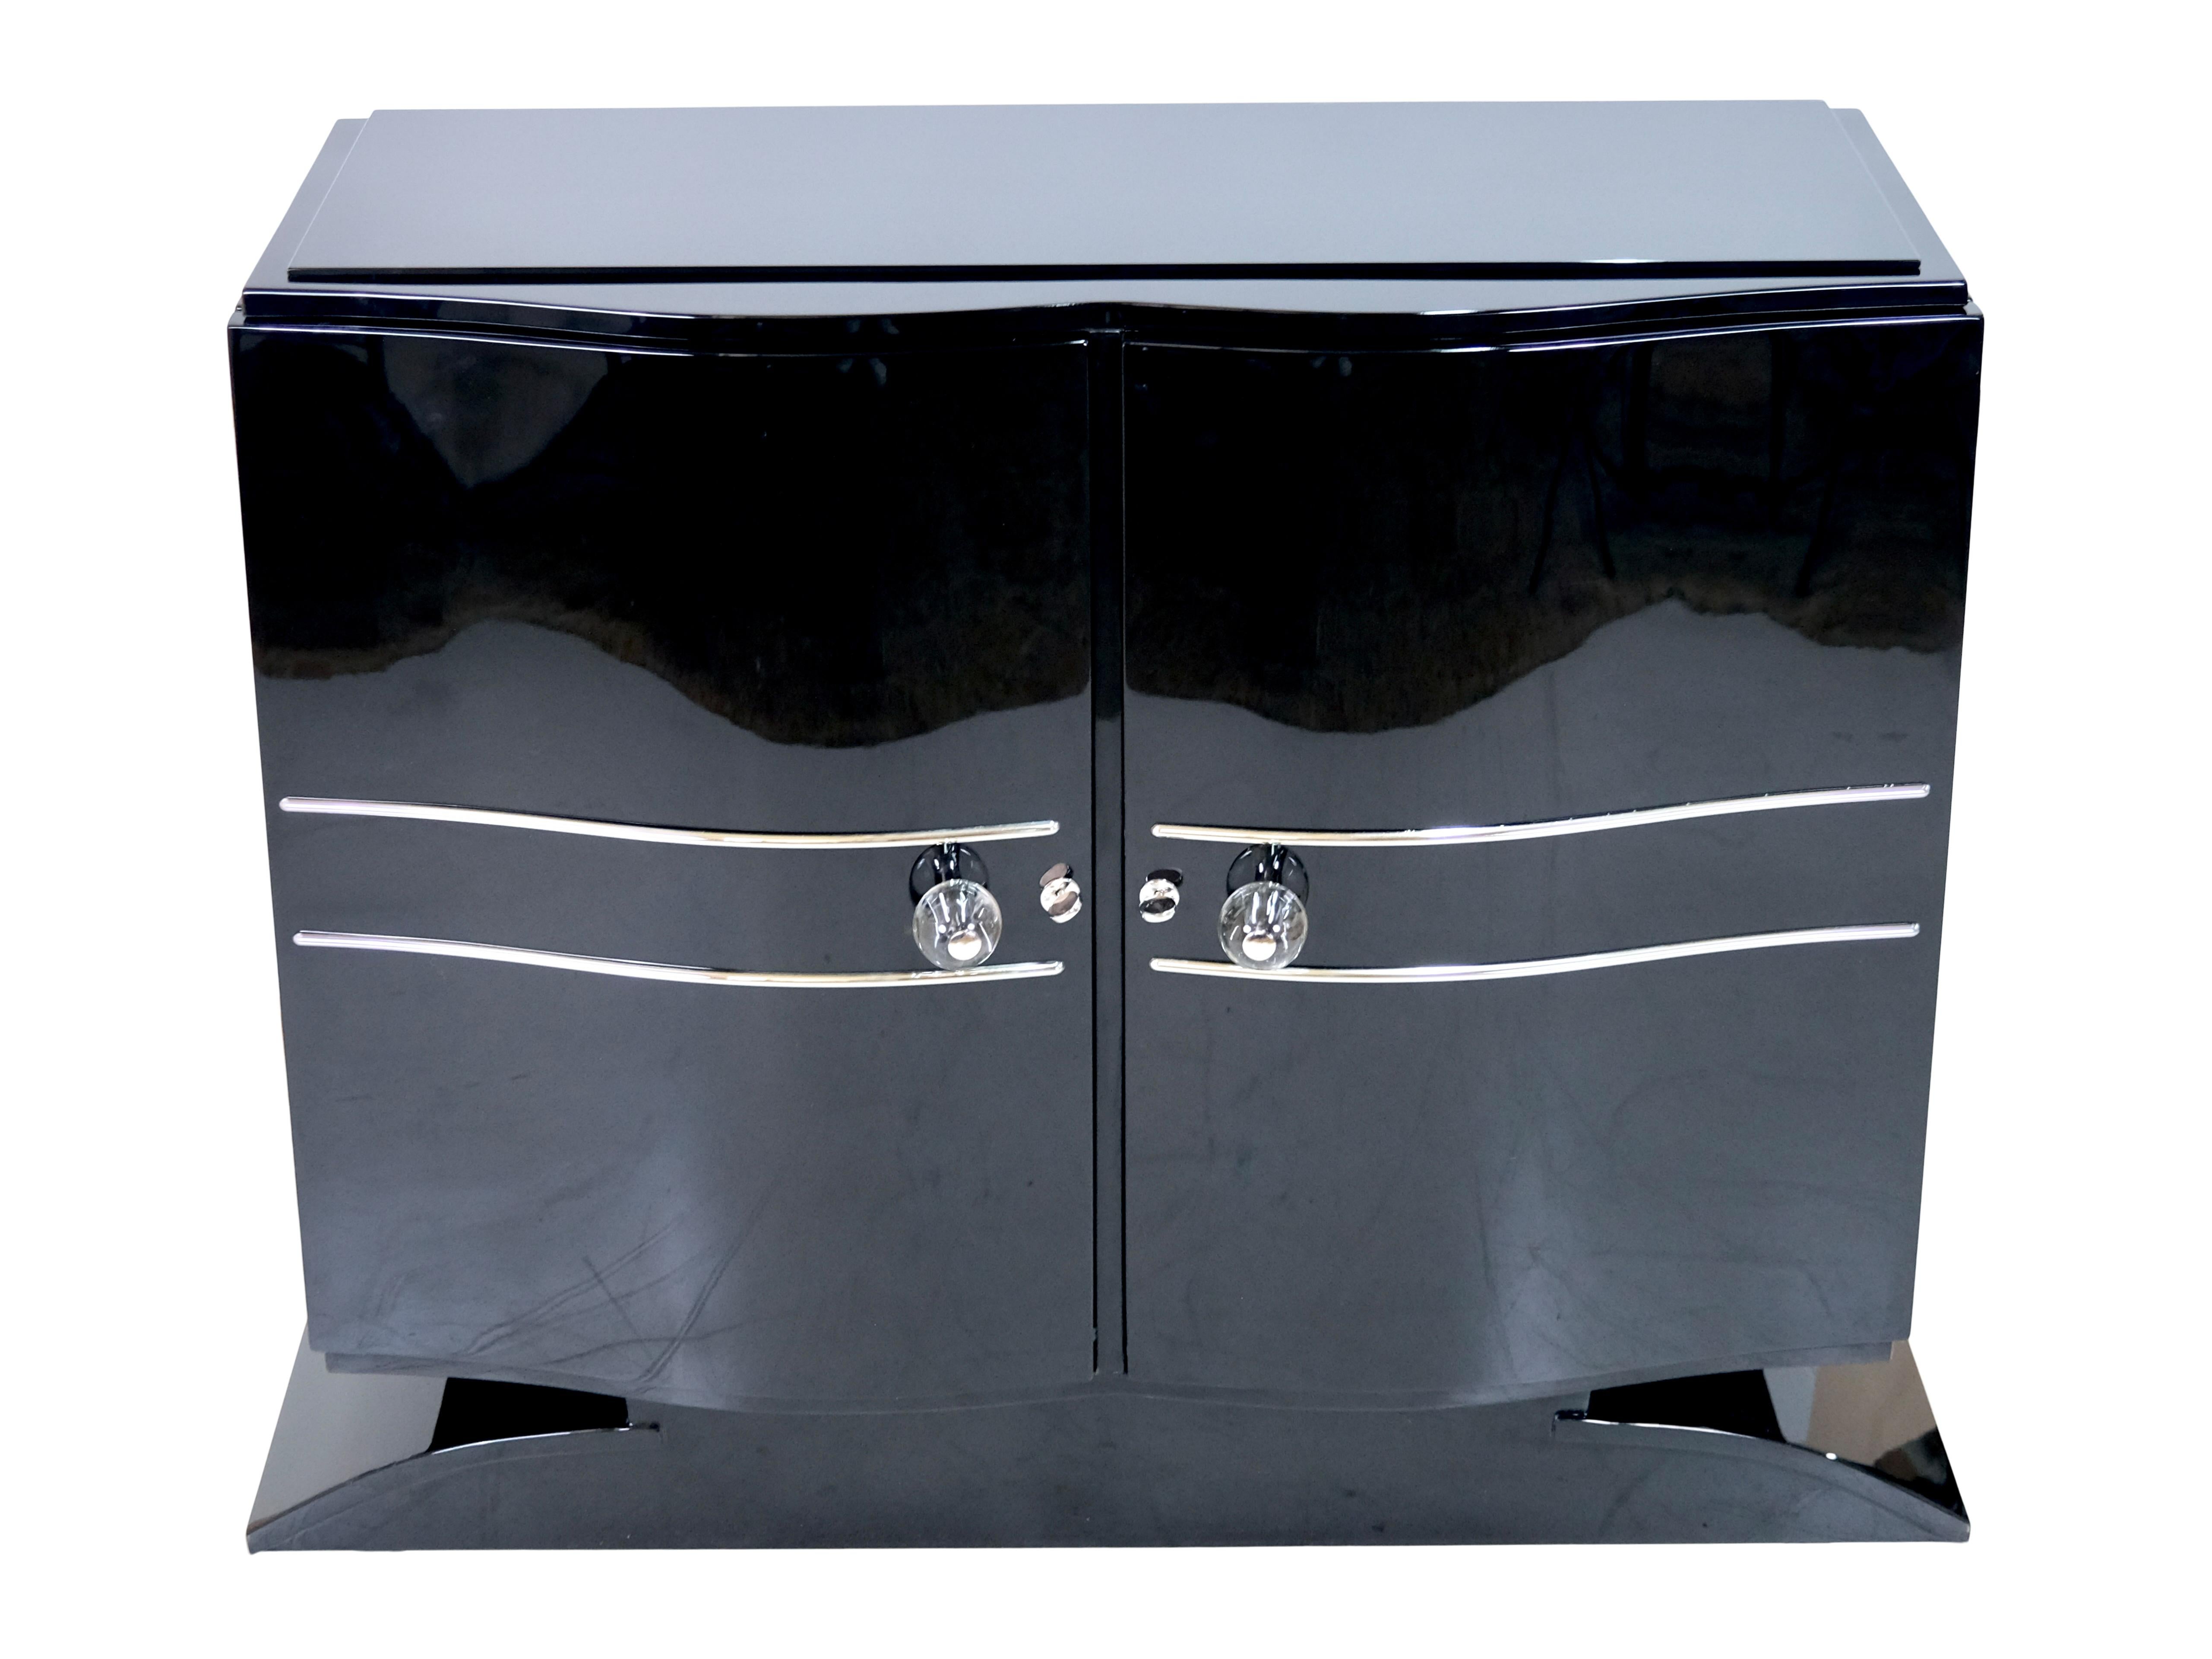 Sideboard with curved front
Two hinged doors
Piano lacquer, black high gloss

Original Art Deco, France 1930s

Dimensions:
Width: 120 cm
Base width: 131 cm
height: 105 cm
Depth: 44 cm